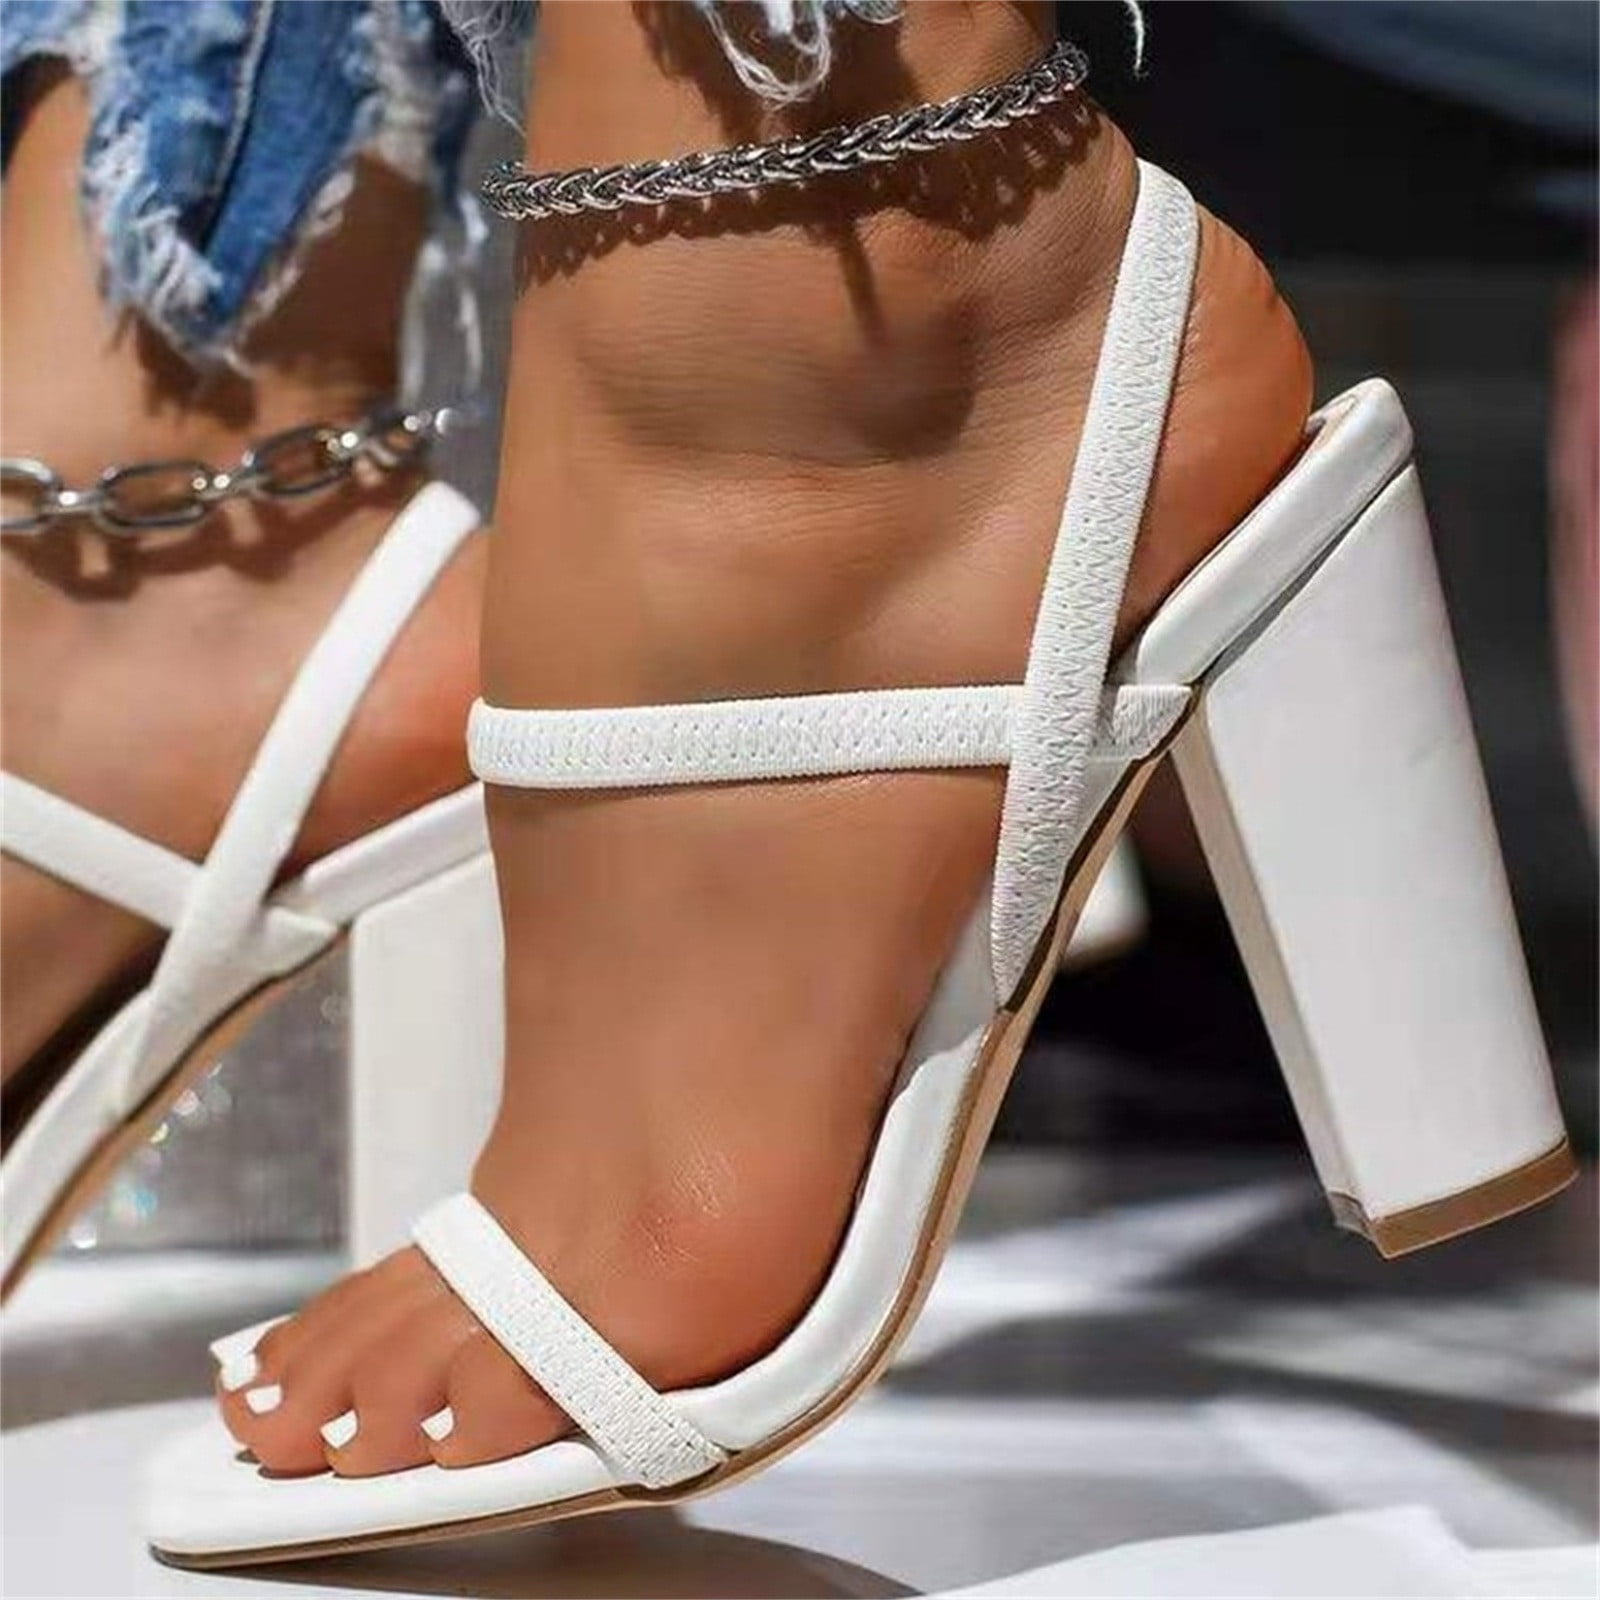 2023 Womens Leather Platform Stylish High Heel Sandals With Diamond  Accents, Thick Bottom, Open Toe, And Platform Perfect For Parties,  Weddings, Or Dressy Occasions Available In Sizes 35 42 With Box From